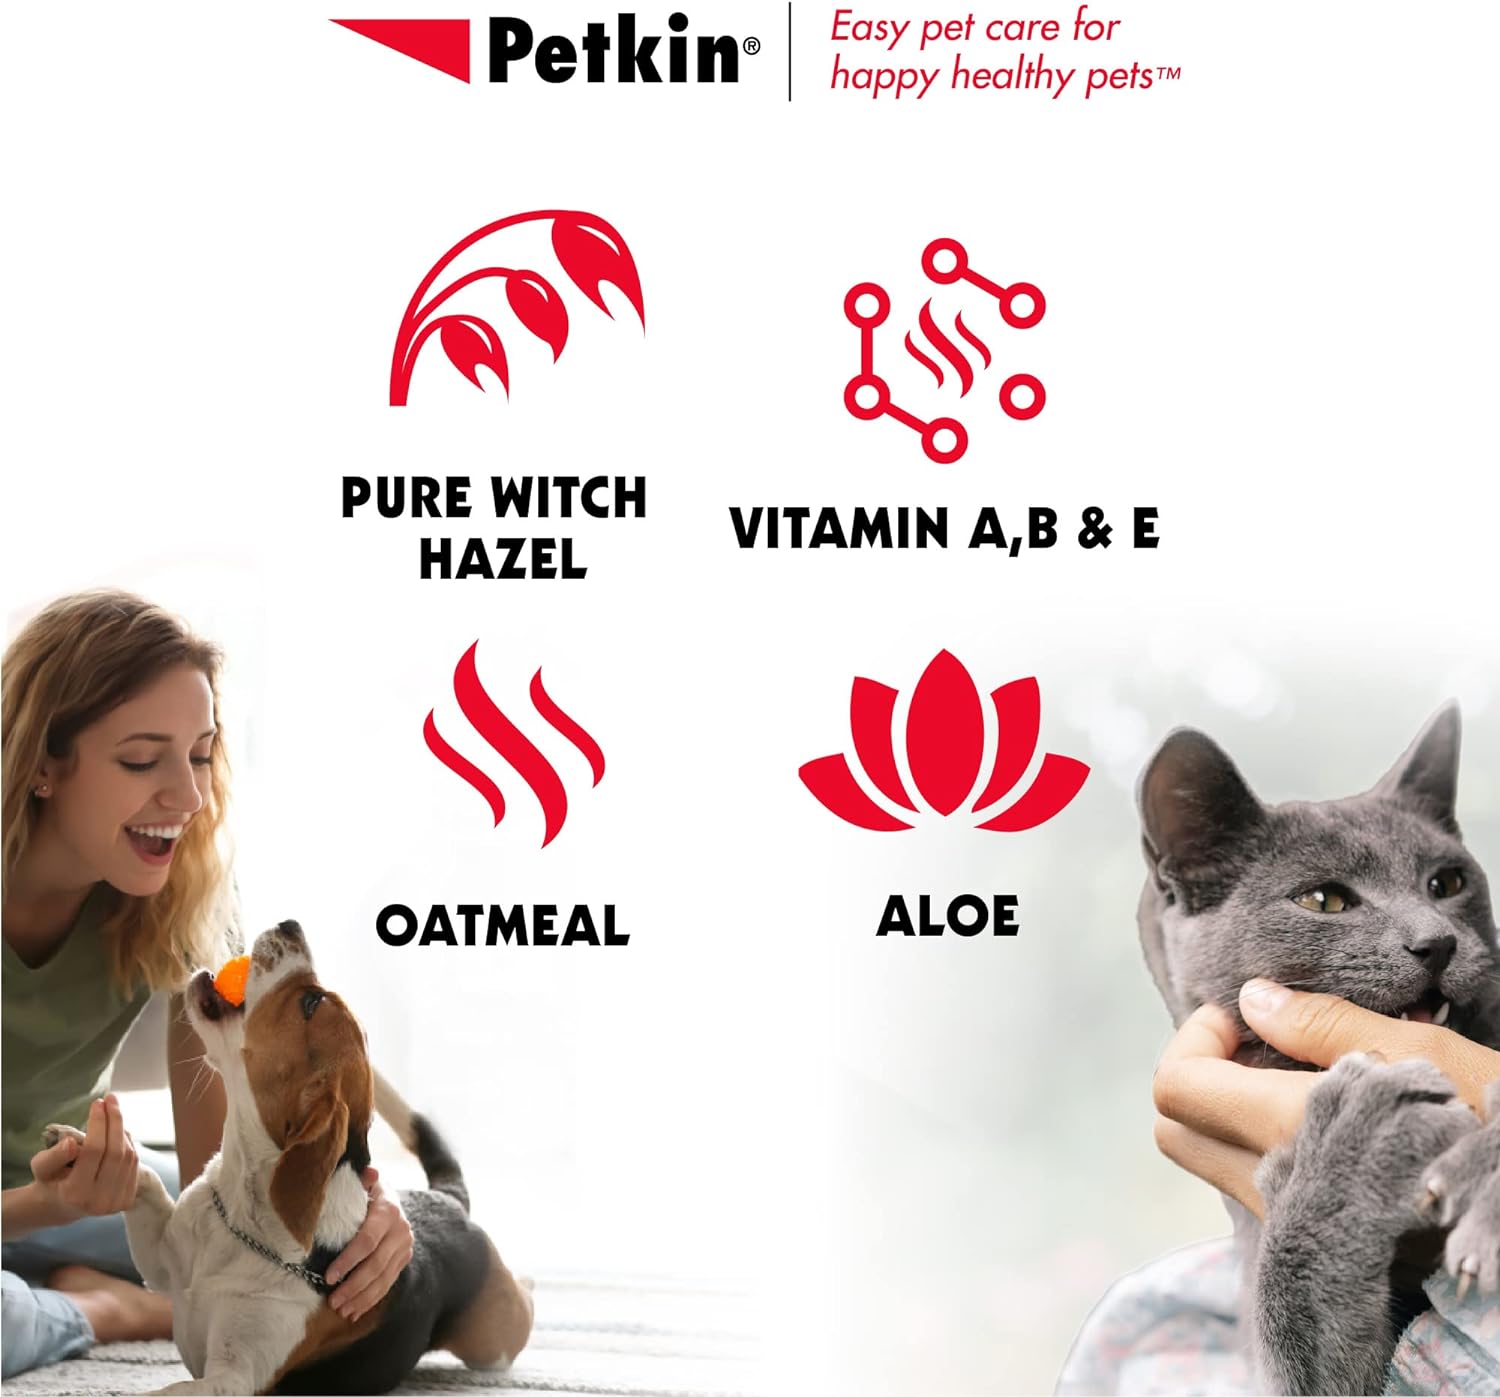 Petkin Anti Itch Wipes for Dogs and Cats, 60 Wipes, 2 Pack - Soothes Hot Spots, Skin Irritations and Scratching - Bitter Taste Stops Licking and Chewing - Super Convenient, Ideal for Home or Travel : Pet Supplies